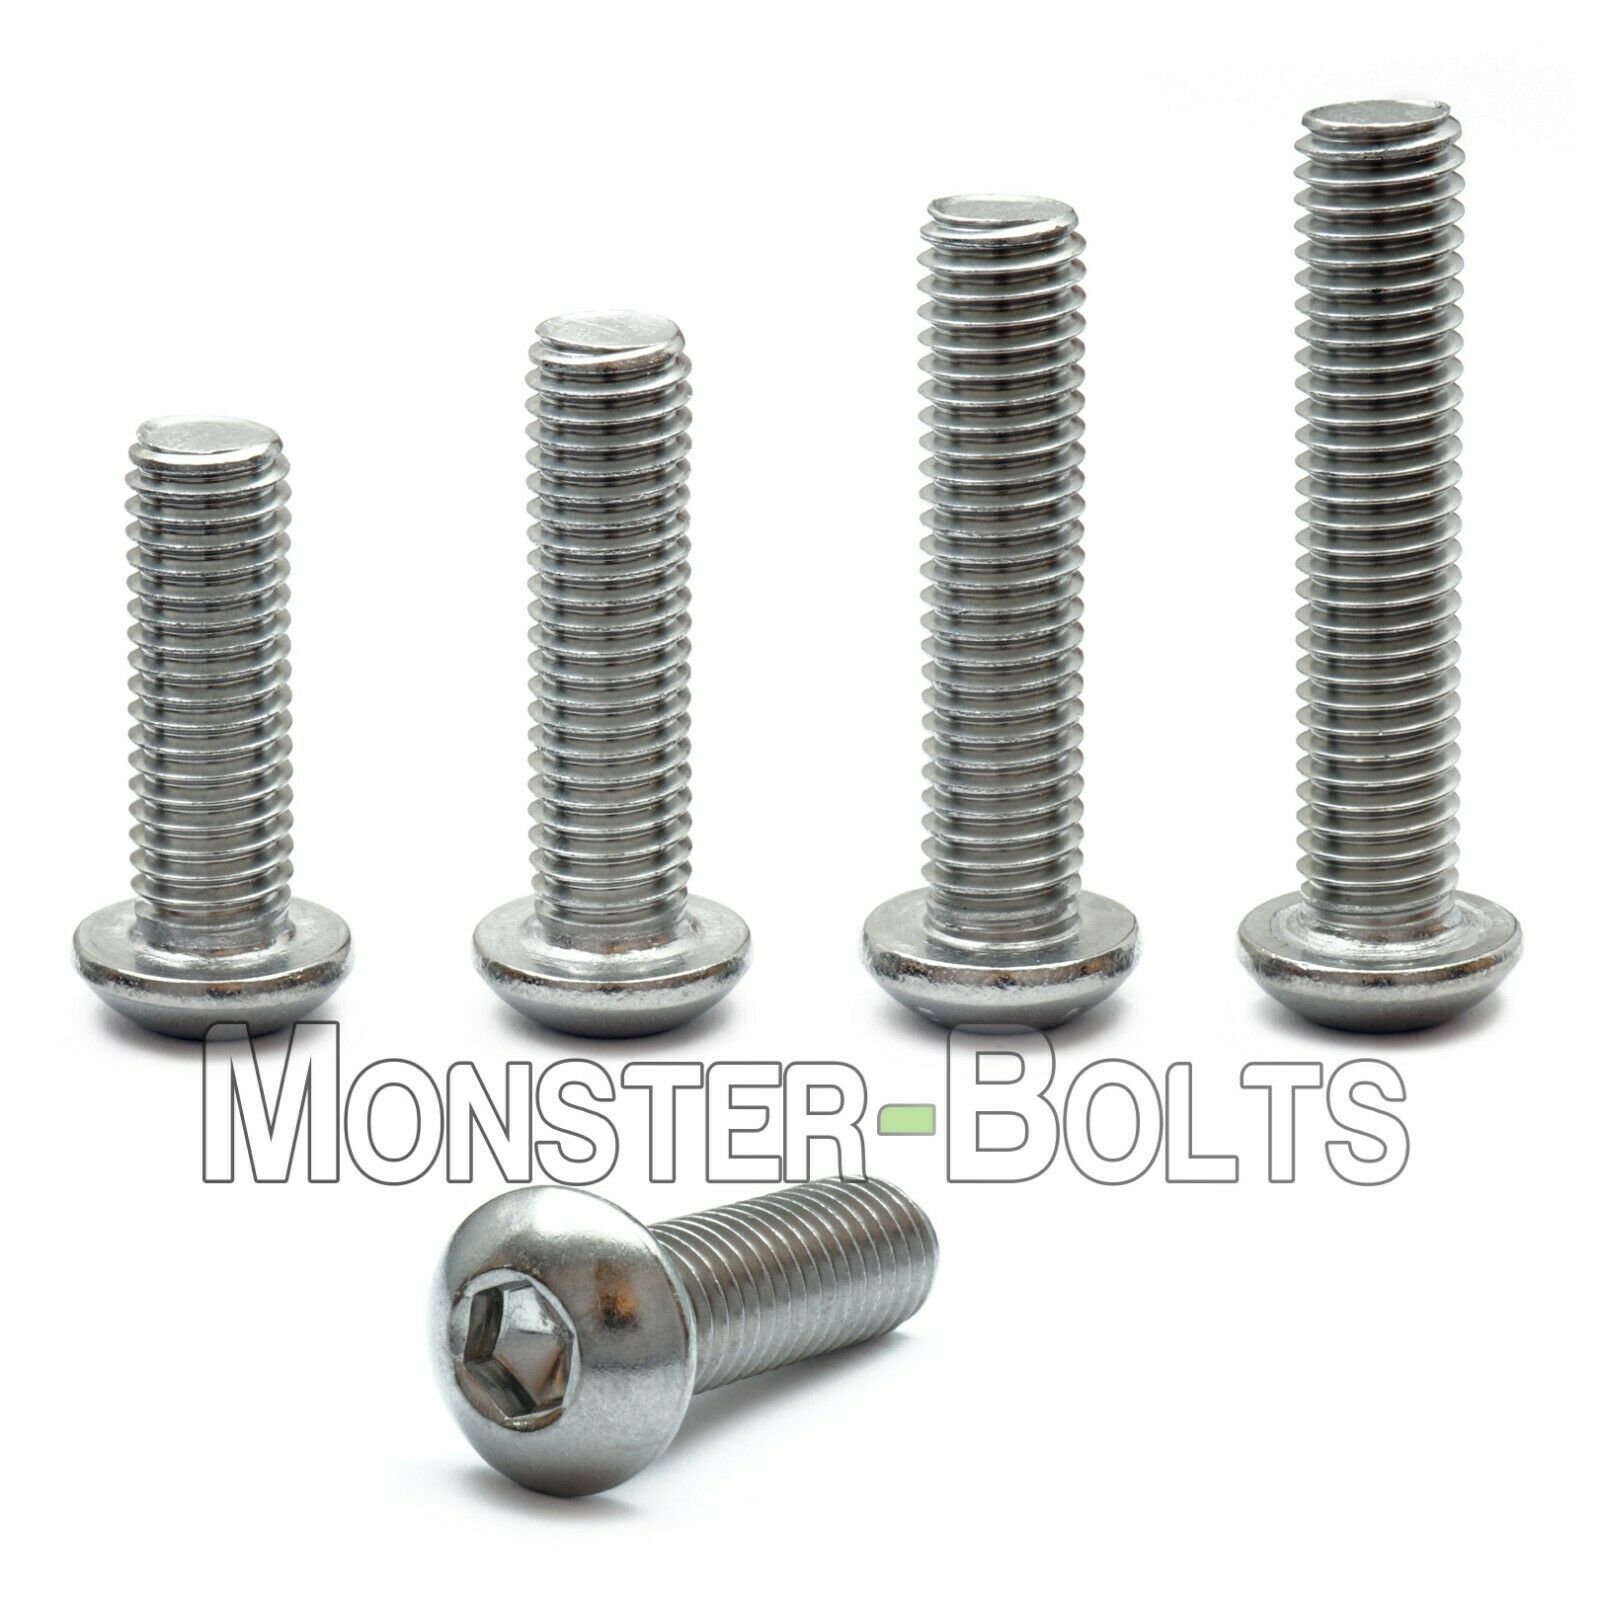 M6 Stainless Steel Button Head Socket Cap Screws A2, Metric Iso 7380 1.0 Coarse